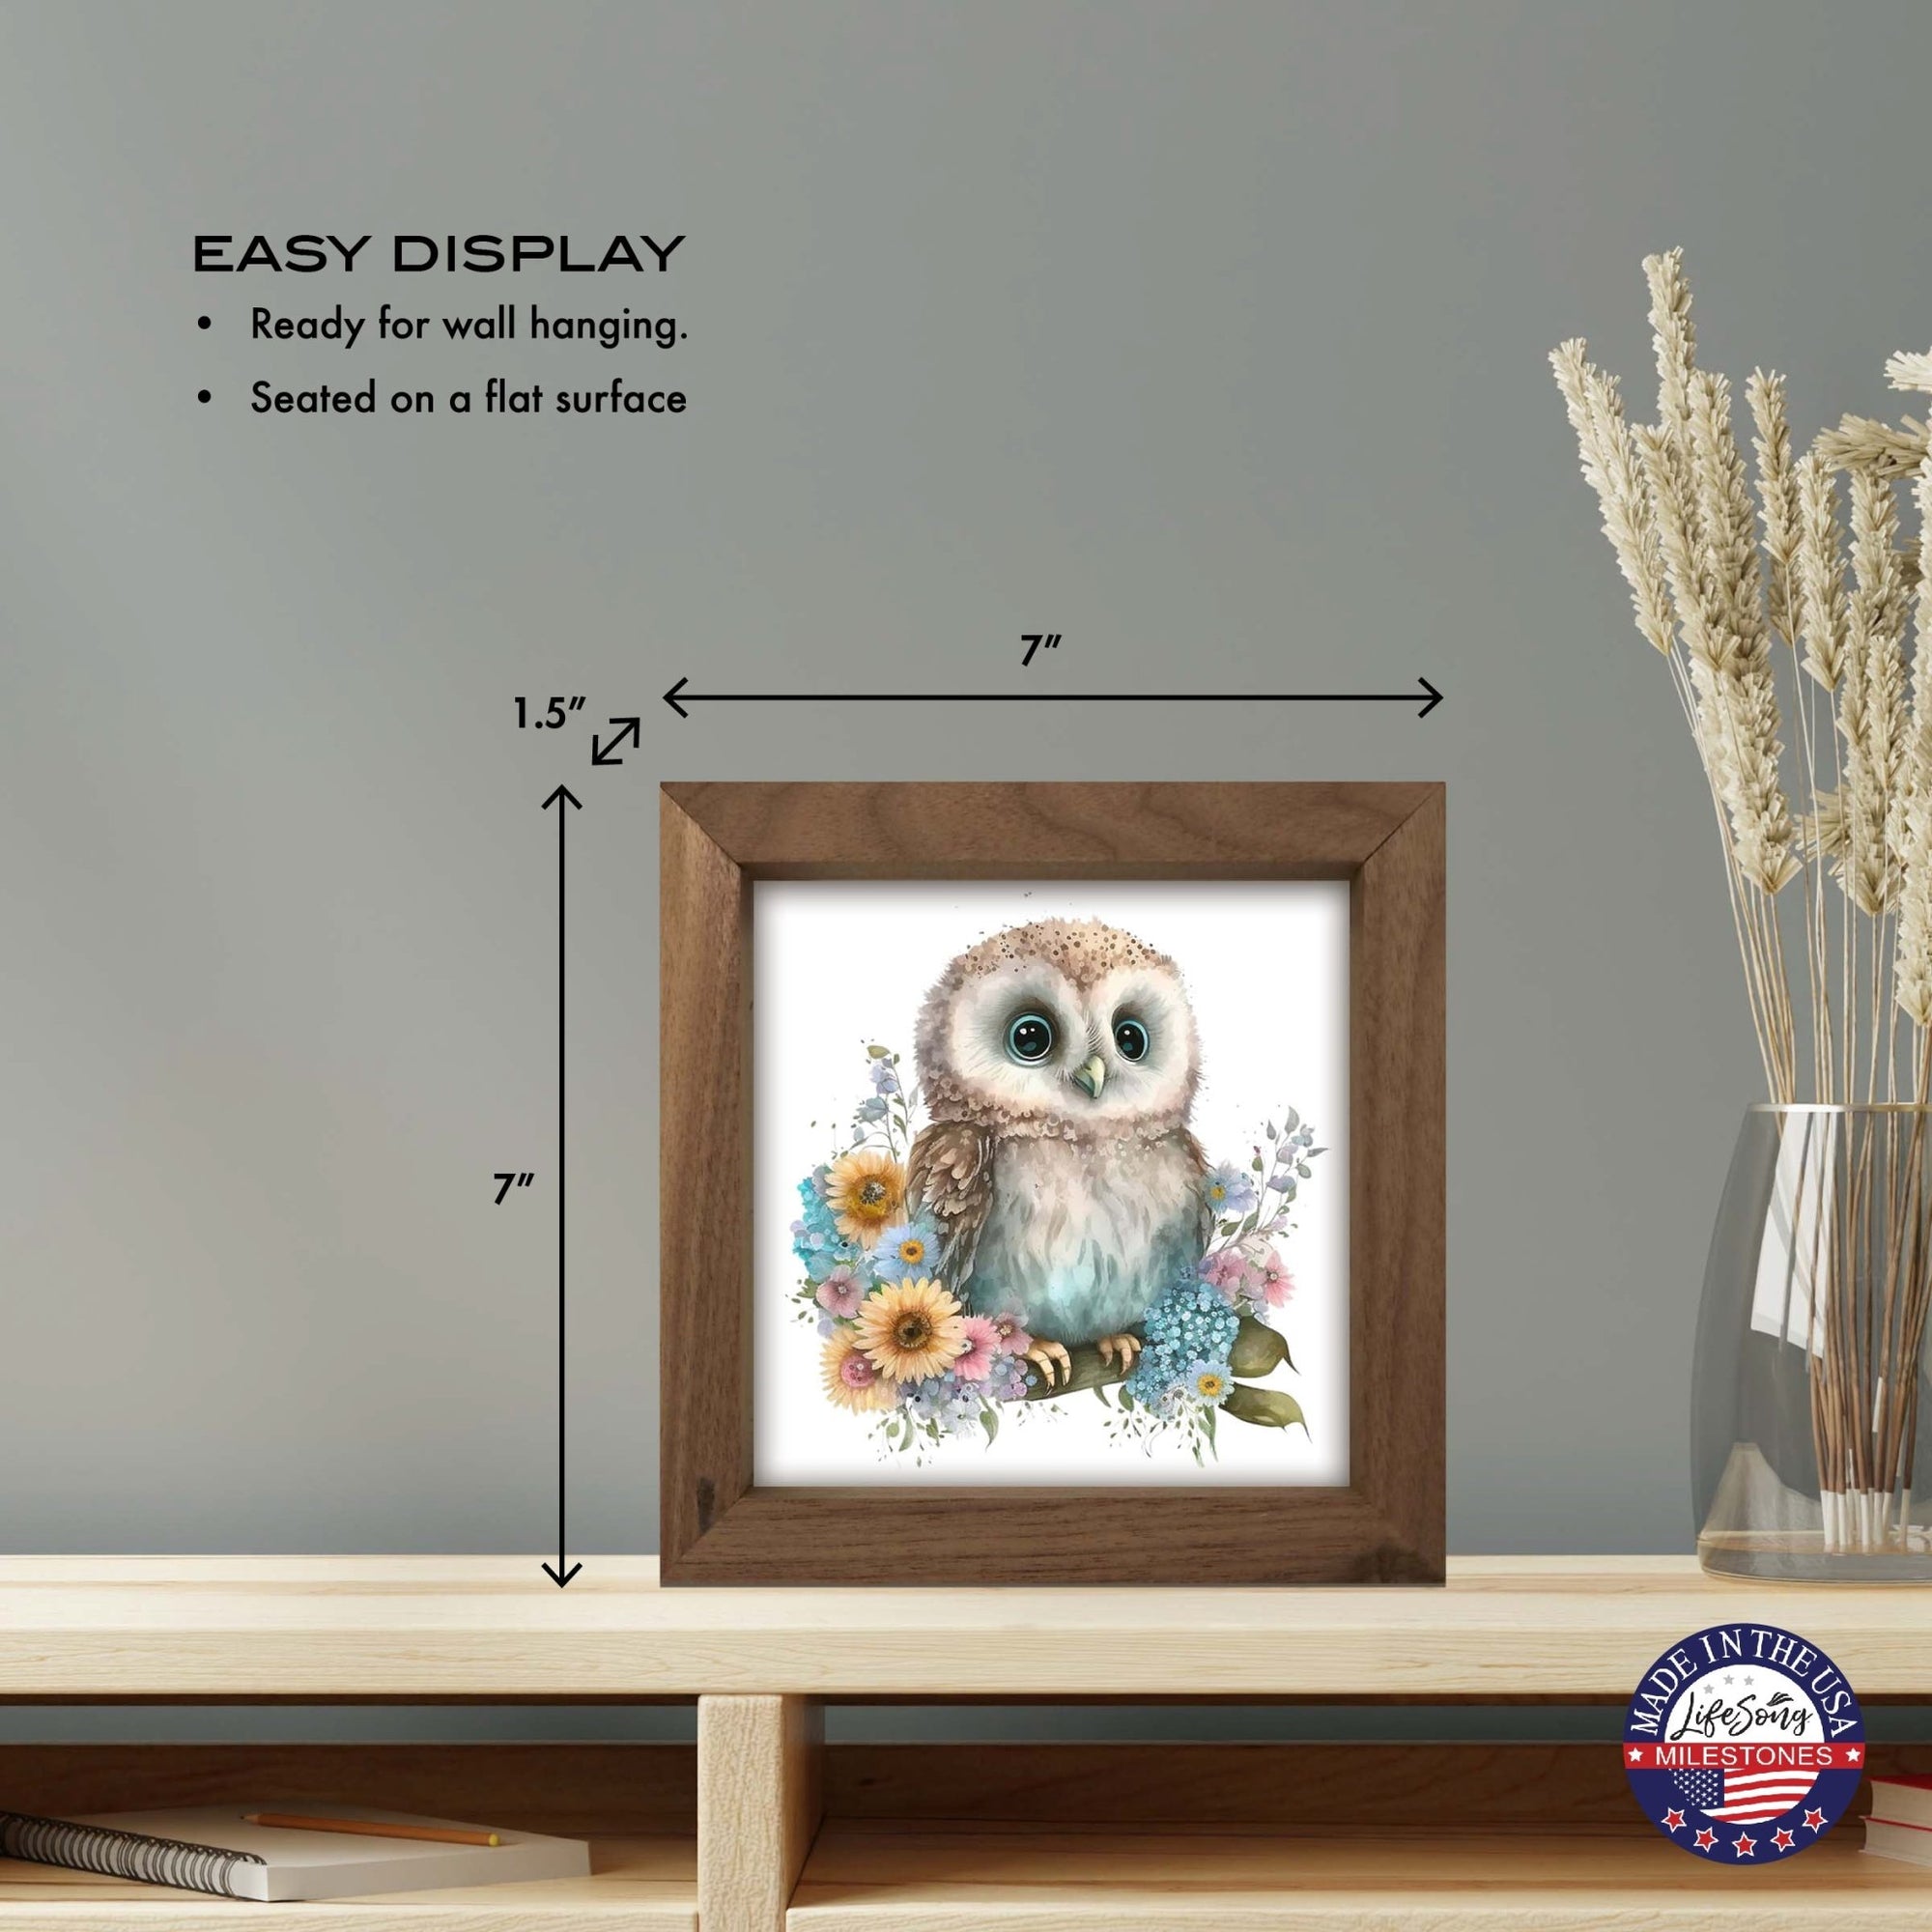 Owl Collection: 7x7 Wooden Wall Art Sign Framed Shadow Box| Baby Owl - LifeSong Milestones